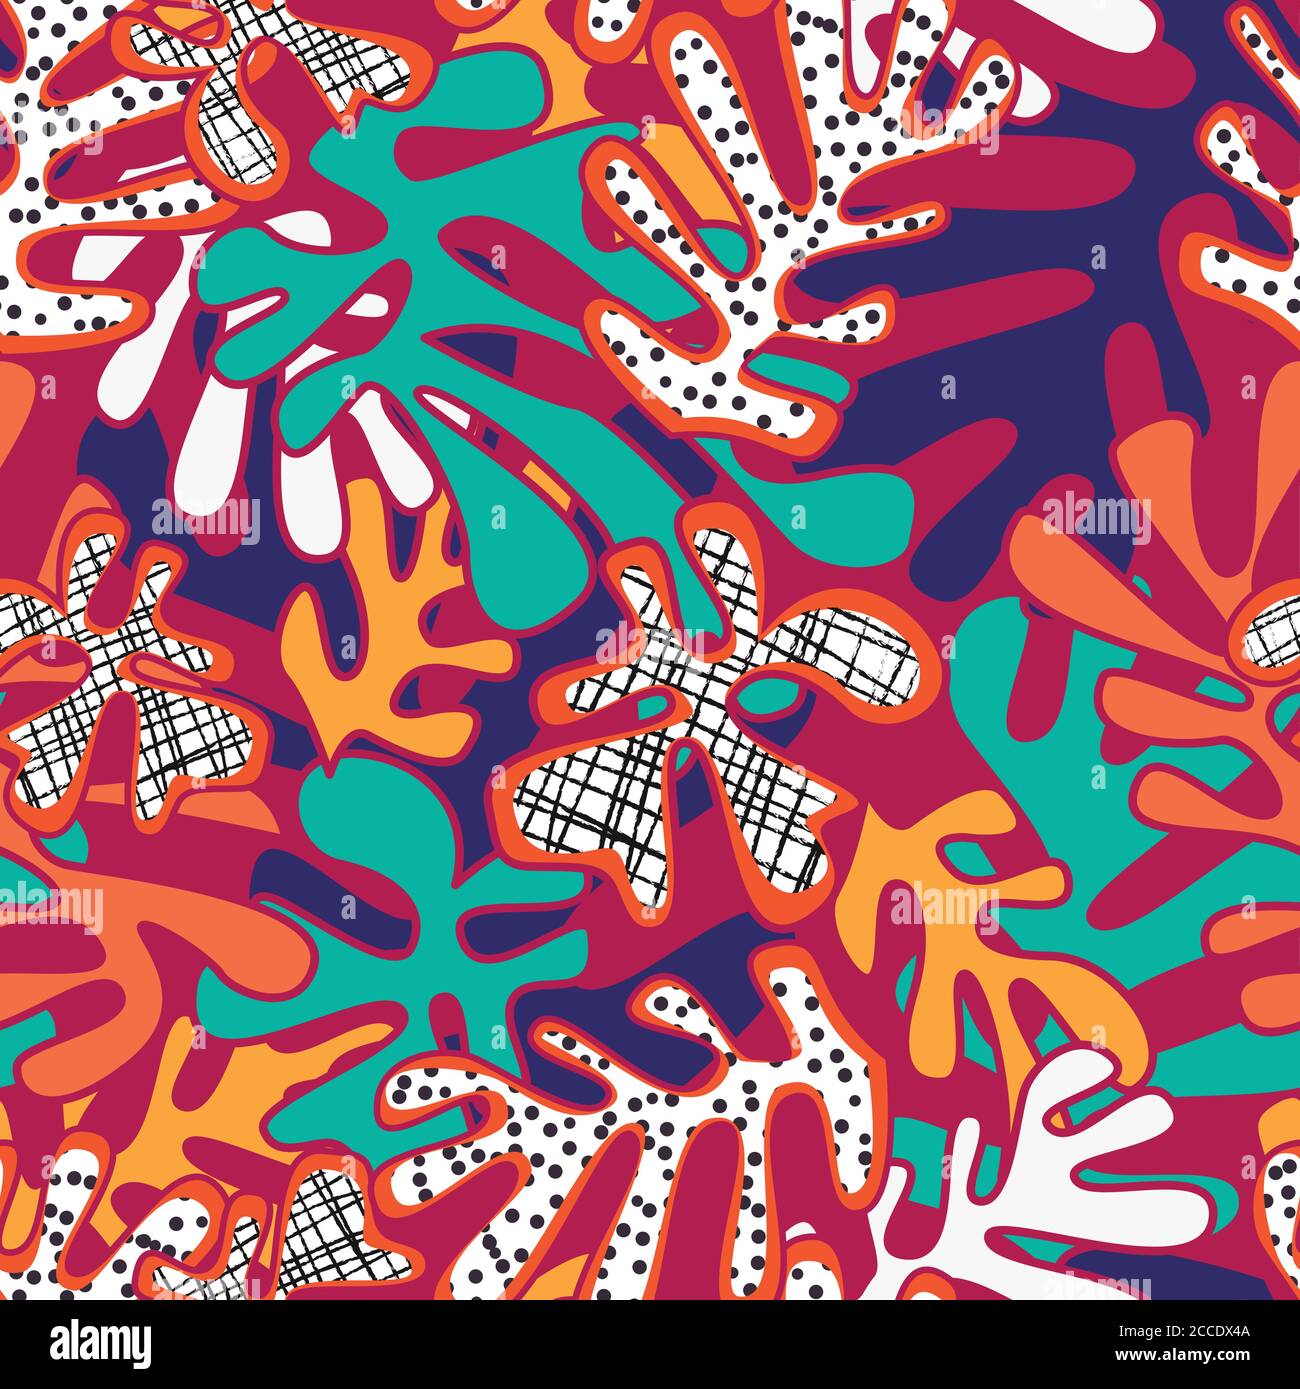 Matisse inspired shapes seamless pattern, colorful design, vector illustration Stock Vector